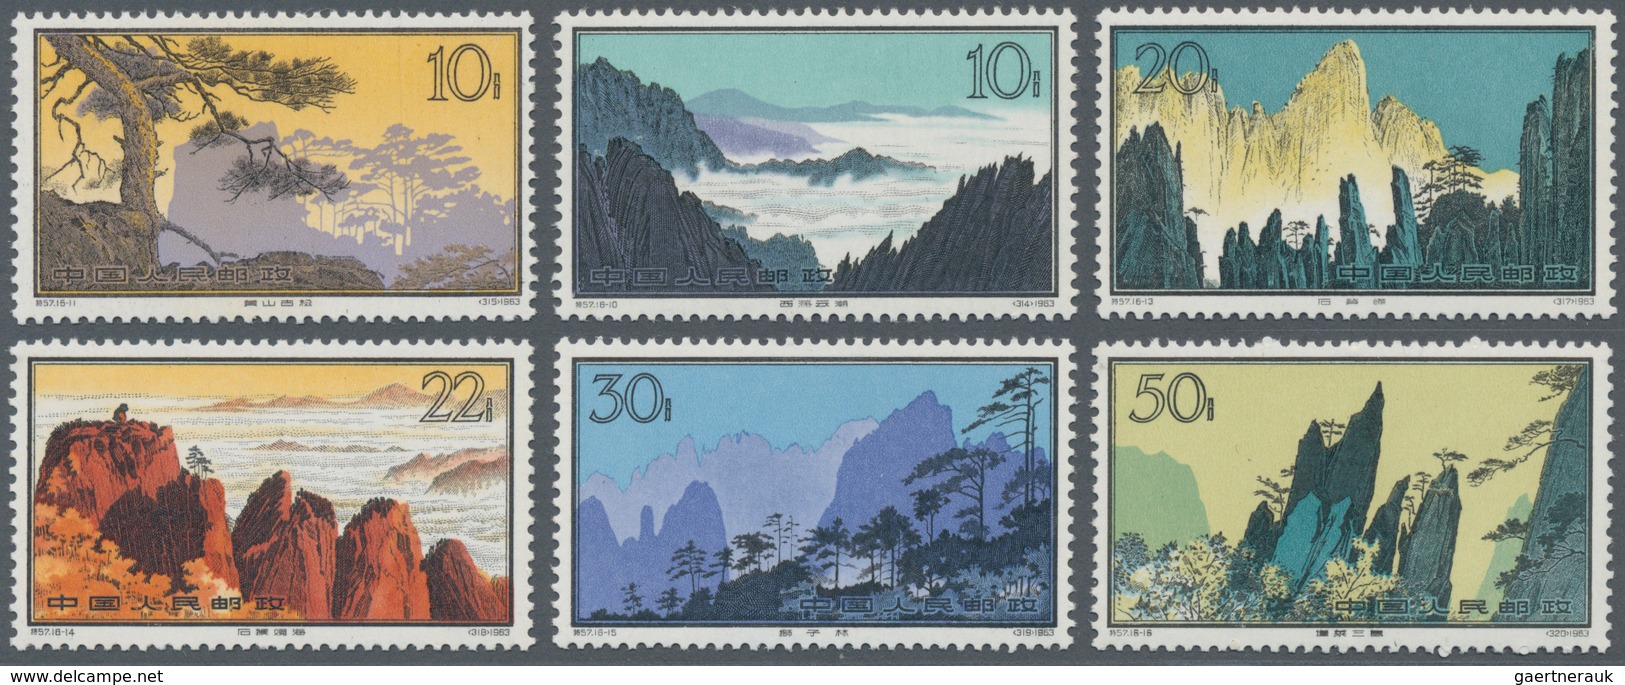 China: 1895/2000 (ca.), collection in books and on stock cards, including many better materials incl